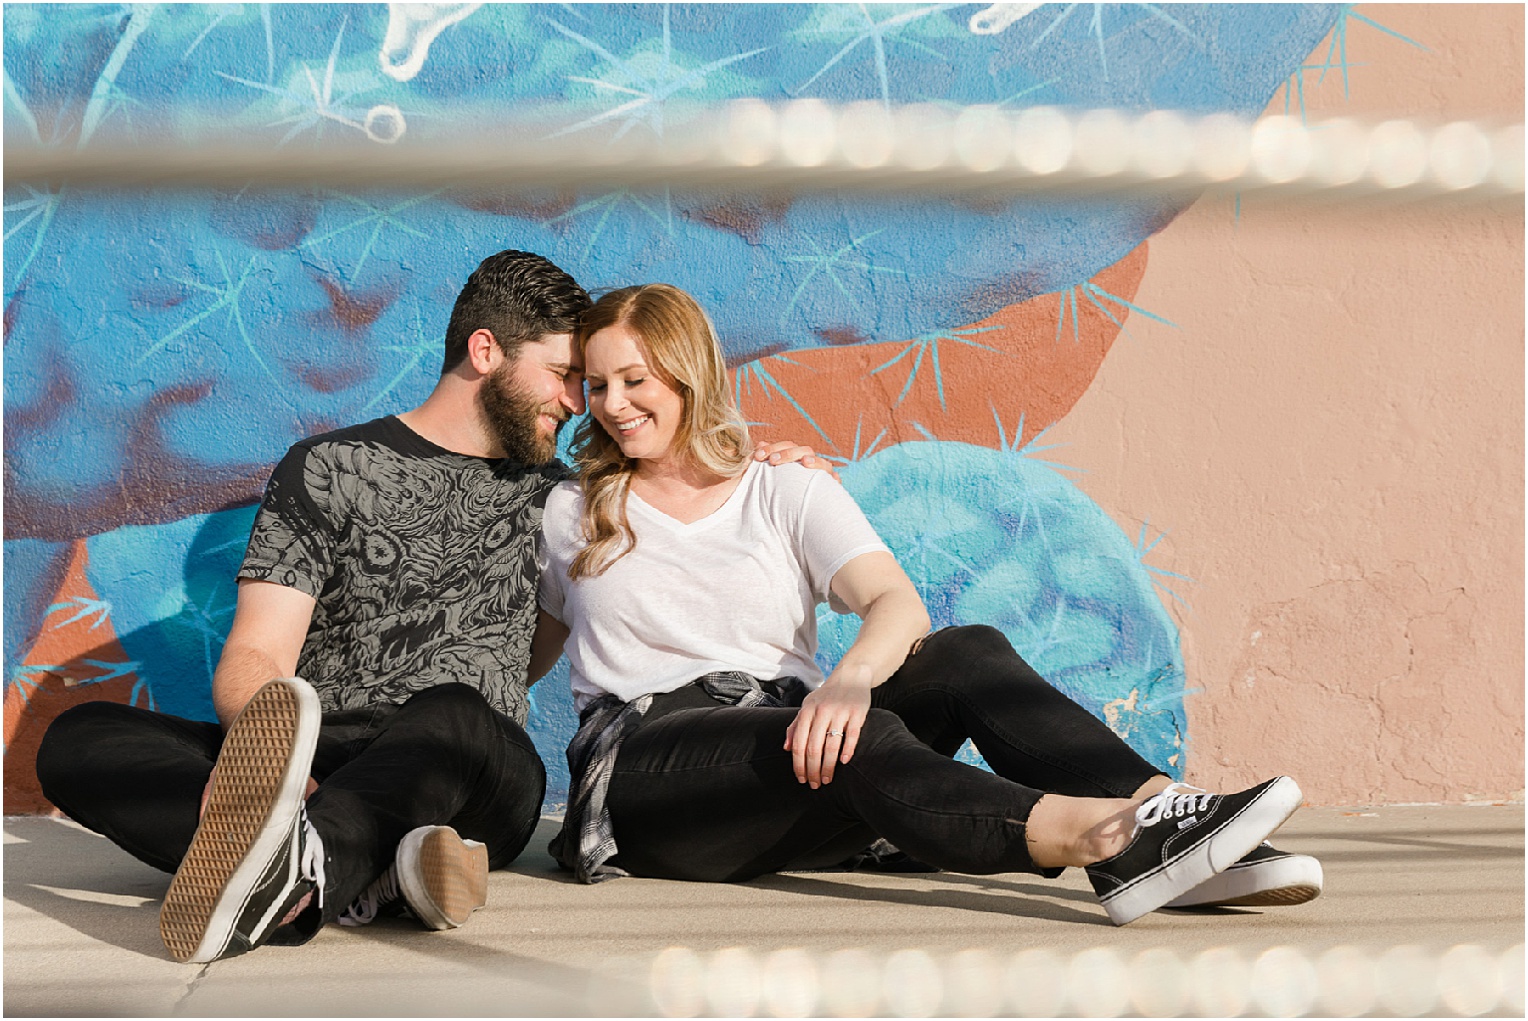 Engagement Photos in Tucson, Tucson AZ Katie + Michael casual downtown engagement session with city mural